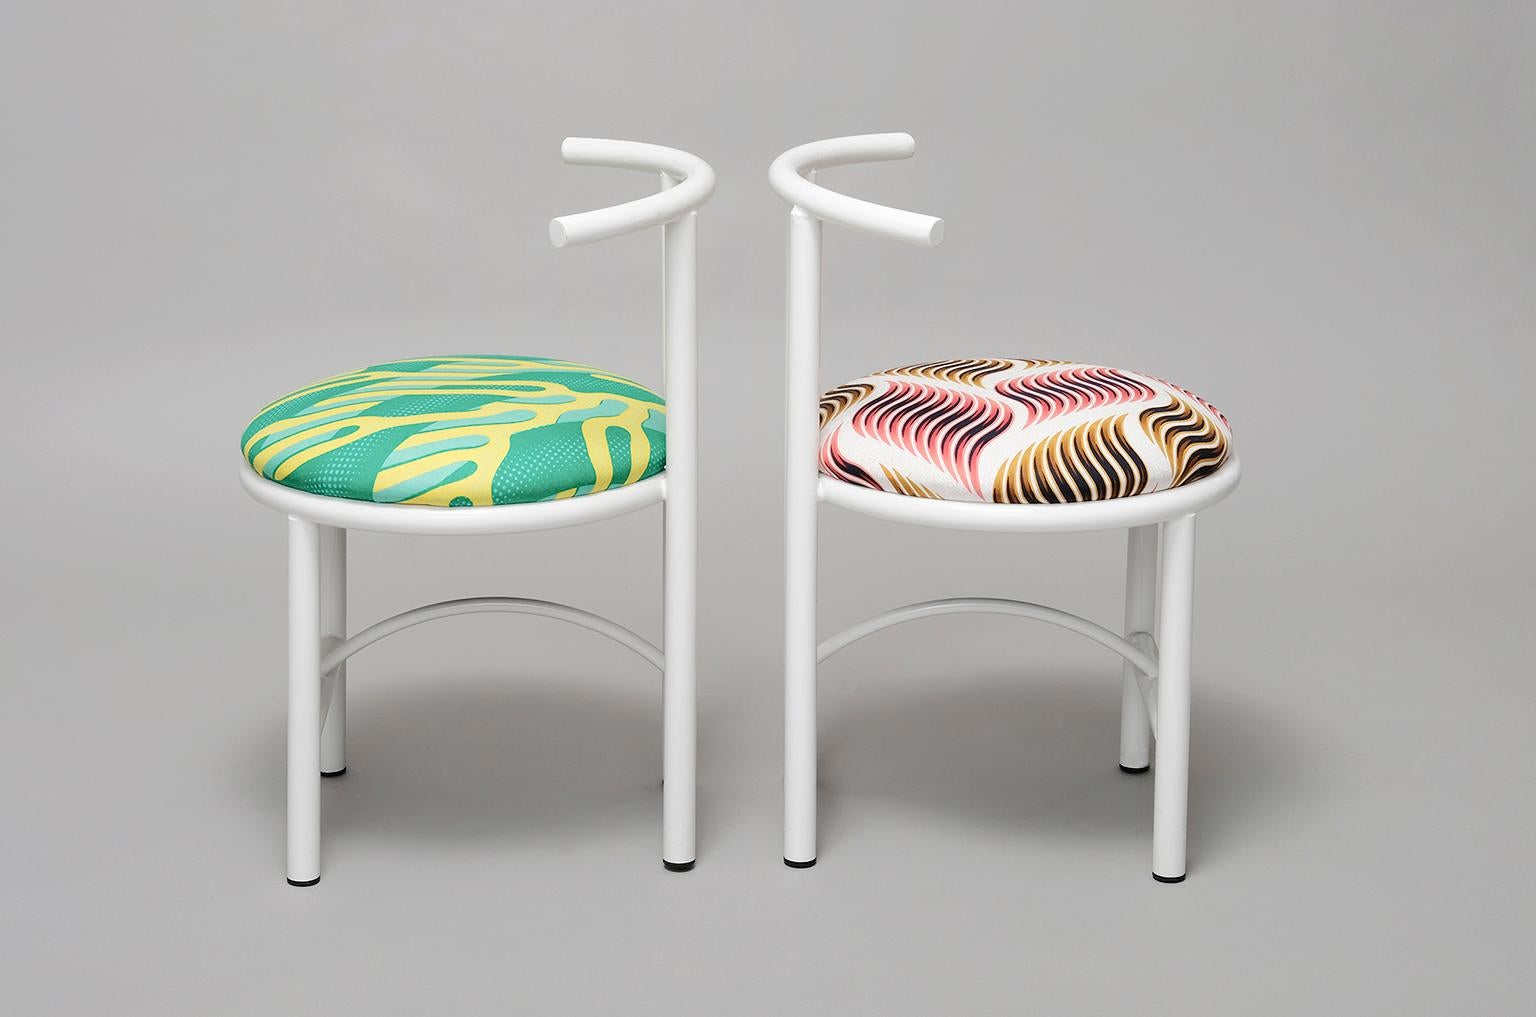 Modern Duo Set, Diner Metal Chair, Colorful Textile, Contemporary Style For Sale